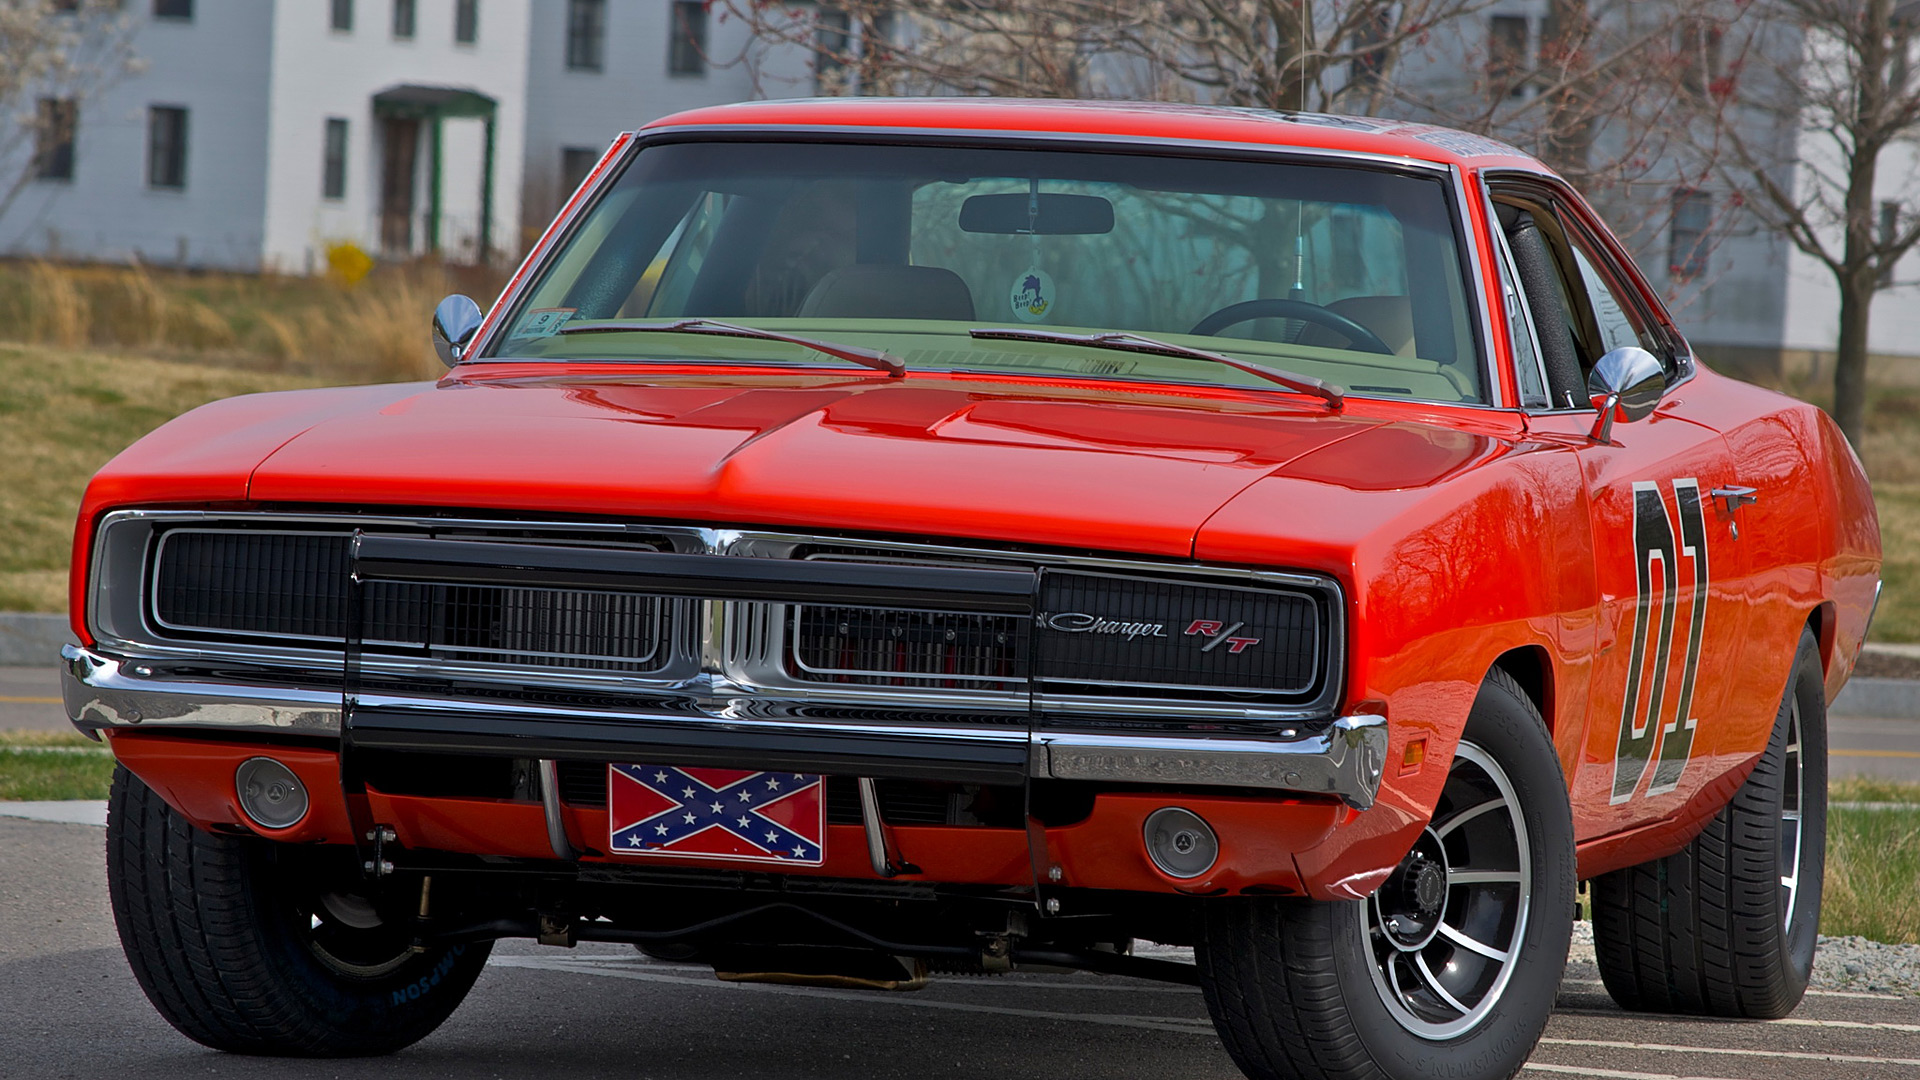 Dodge Charger General Lee Wallpaper HD Image Wsupercars